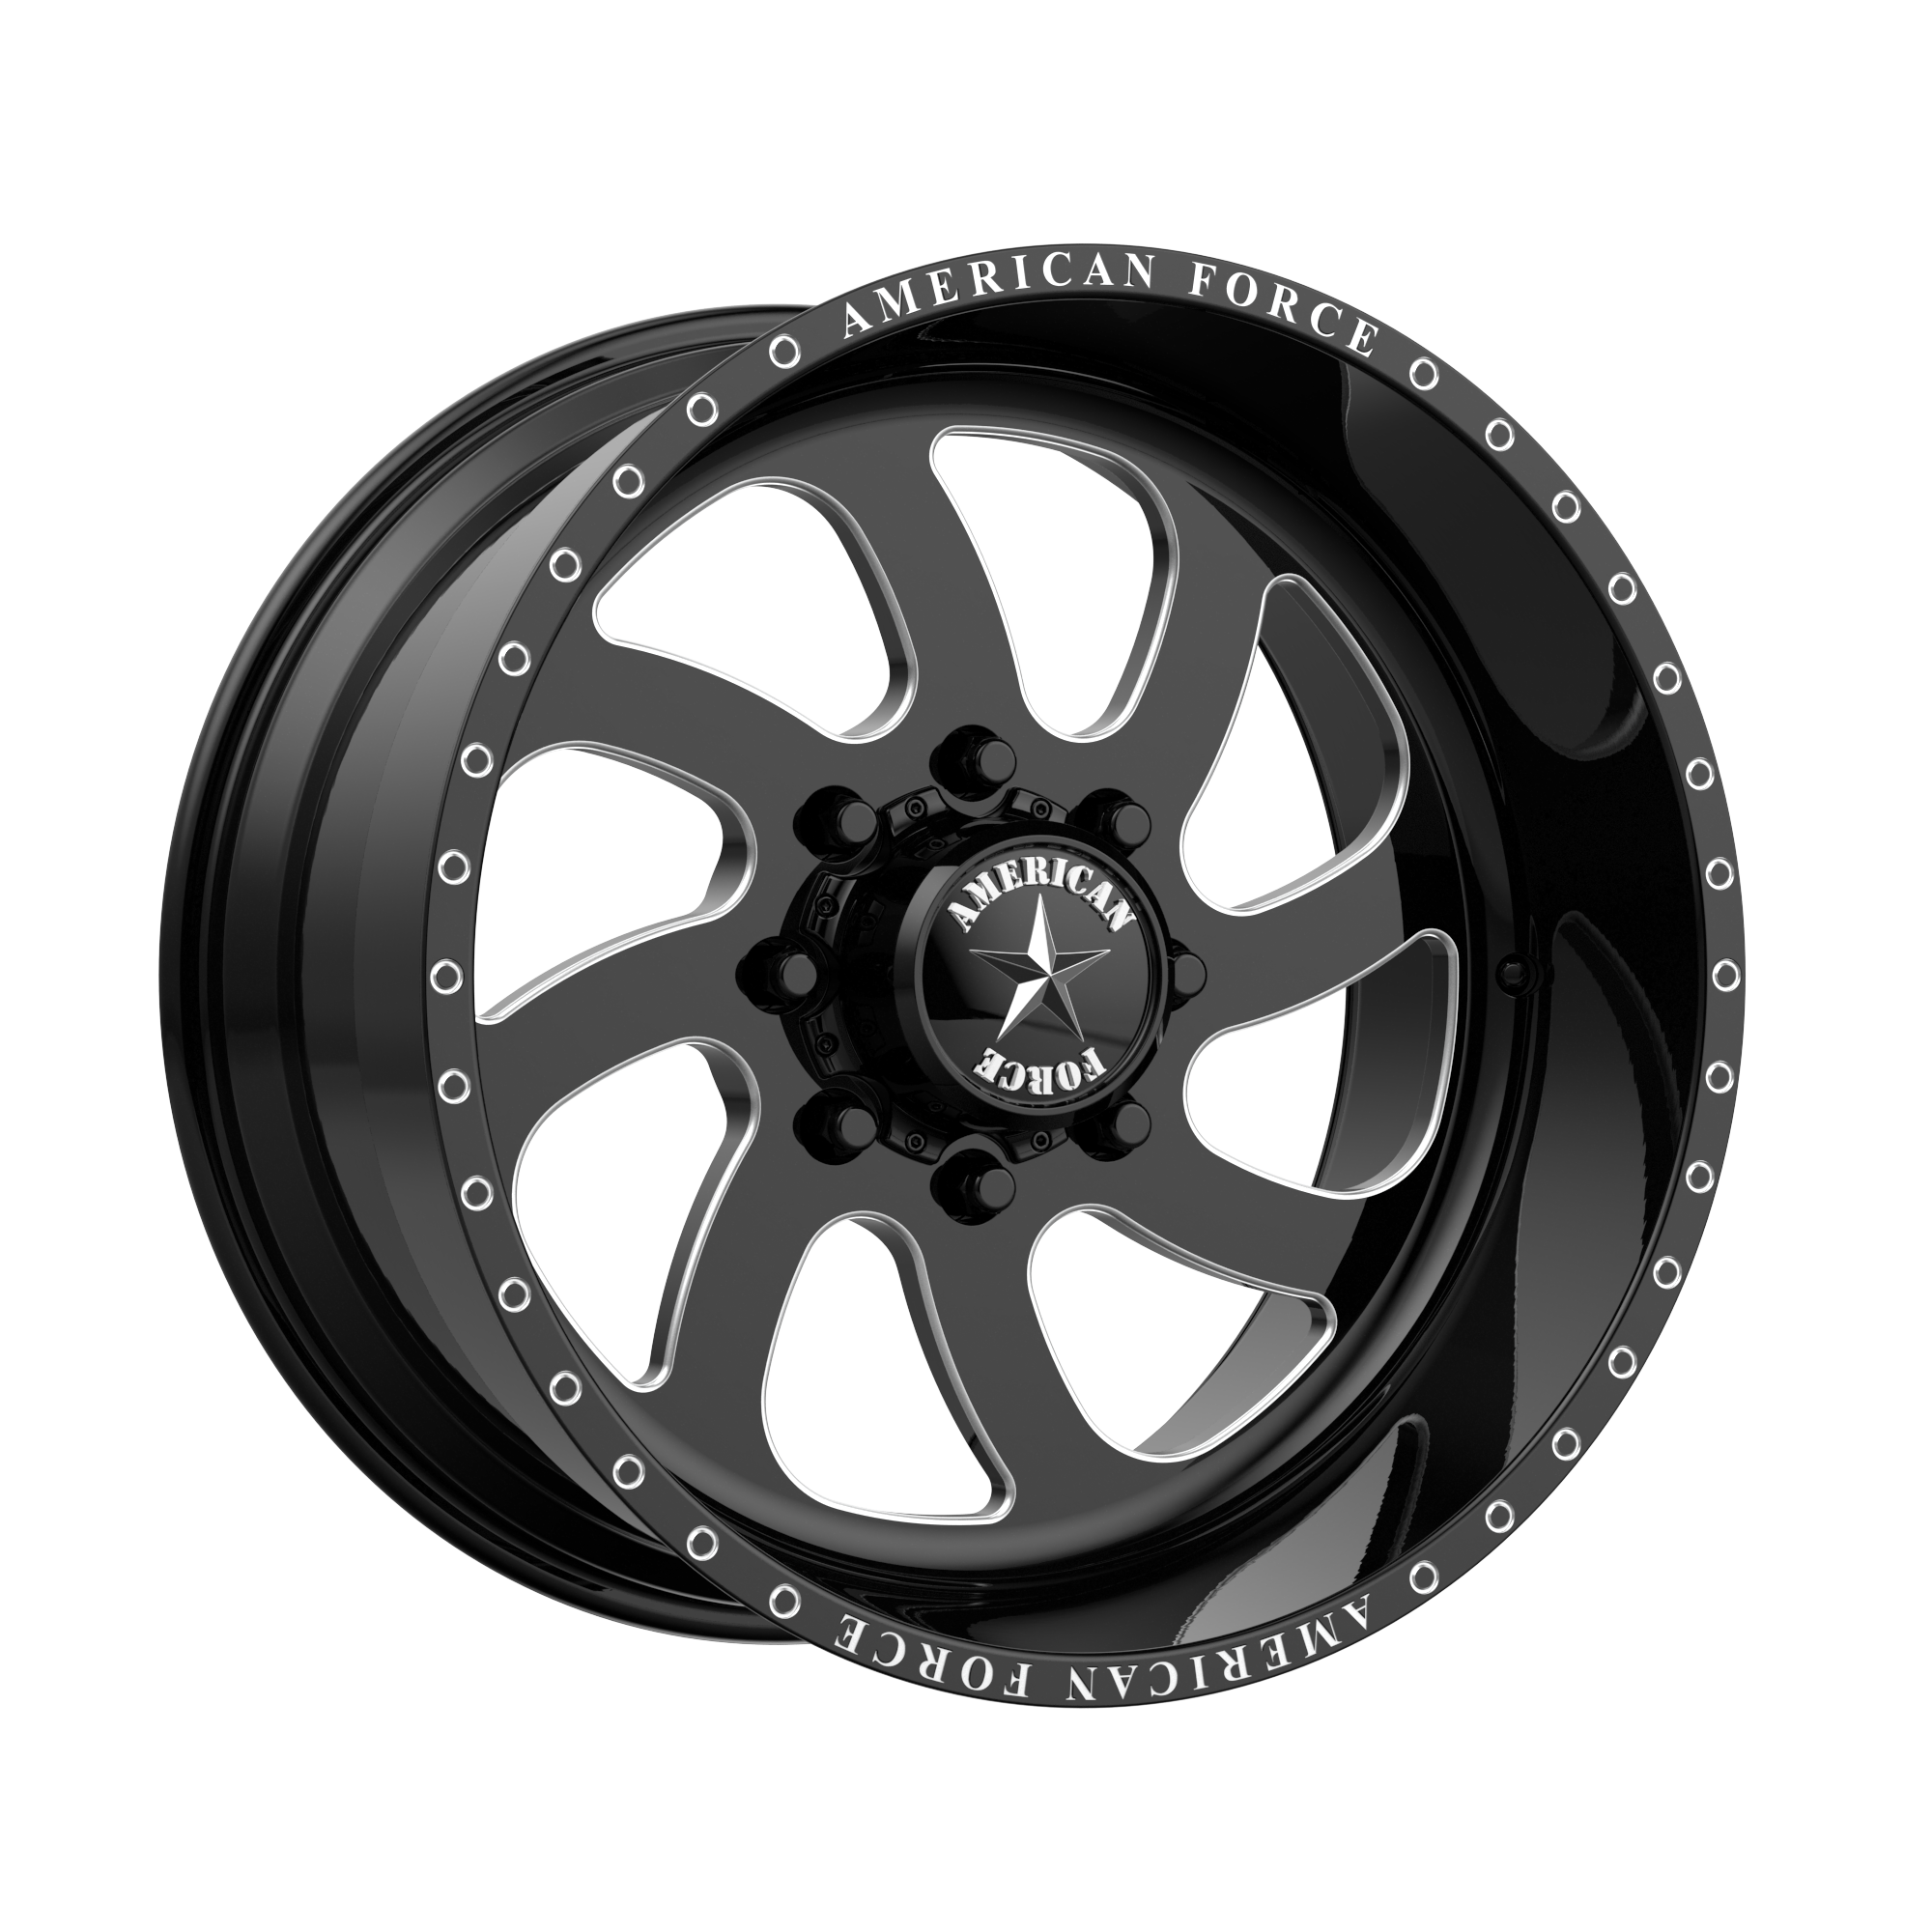 BLADE SS 20x10 6x135.00 GLOSS BLACK MACHINED (-25 mm) - Tires and Engine Performance